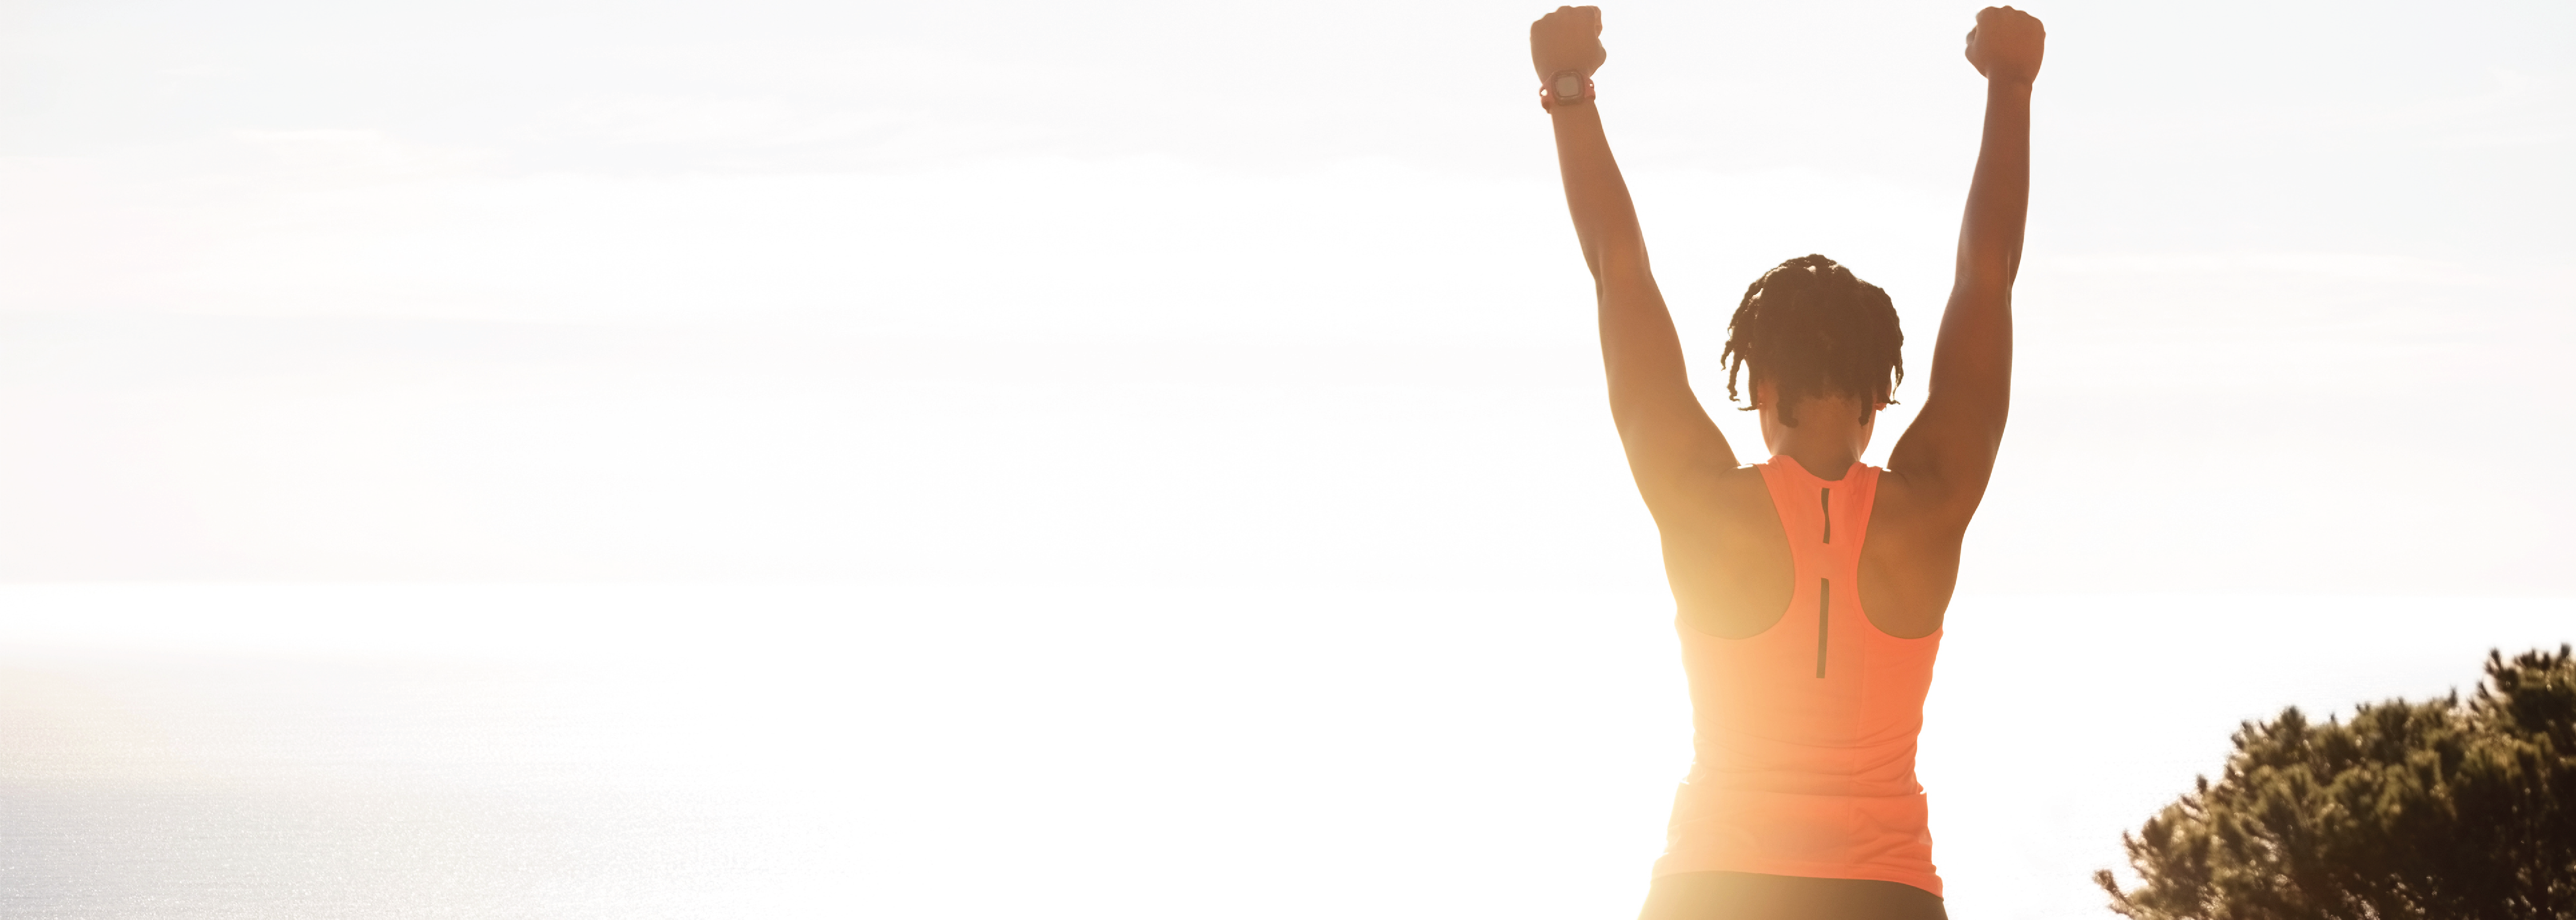 woman celebrating success with arms up in the air